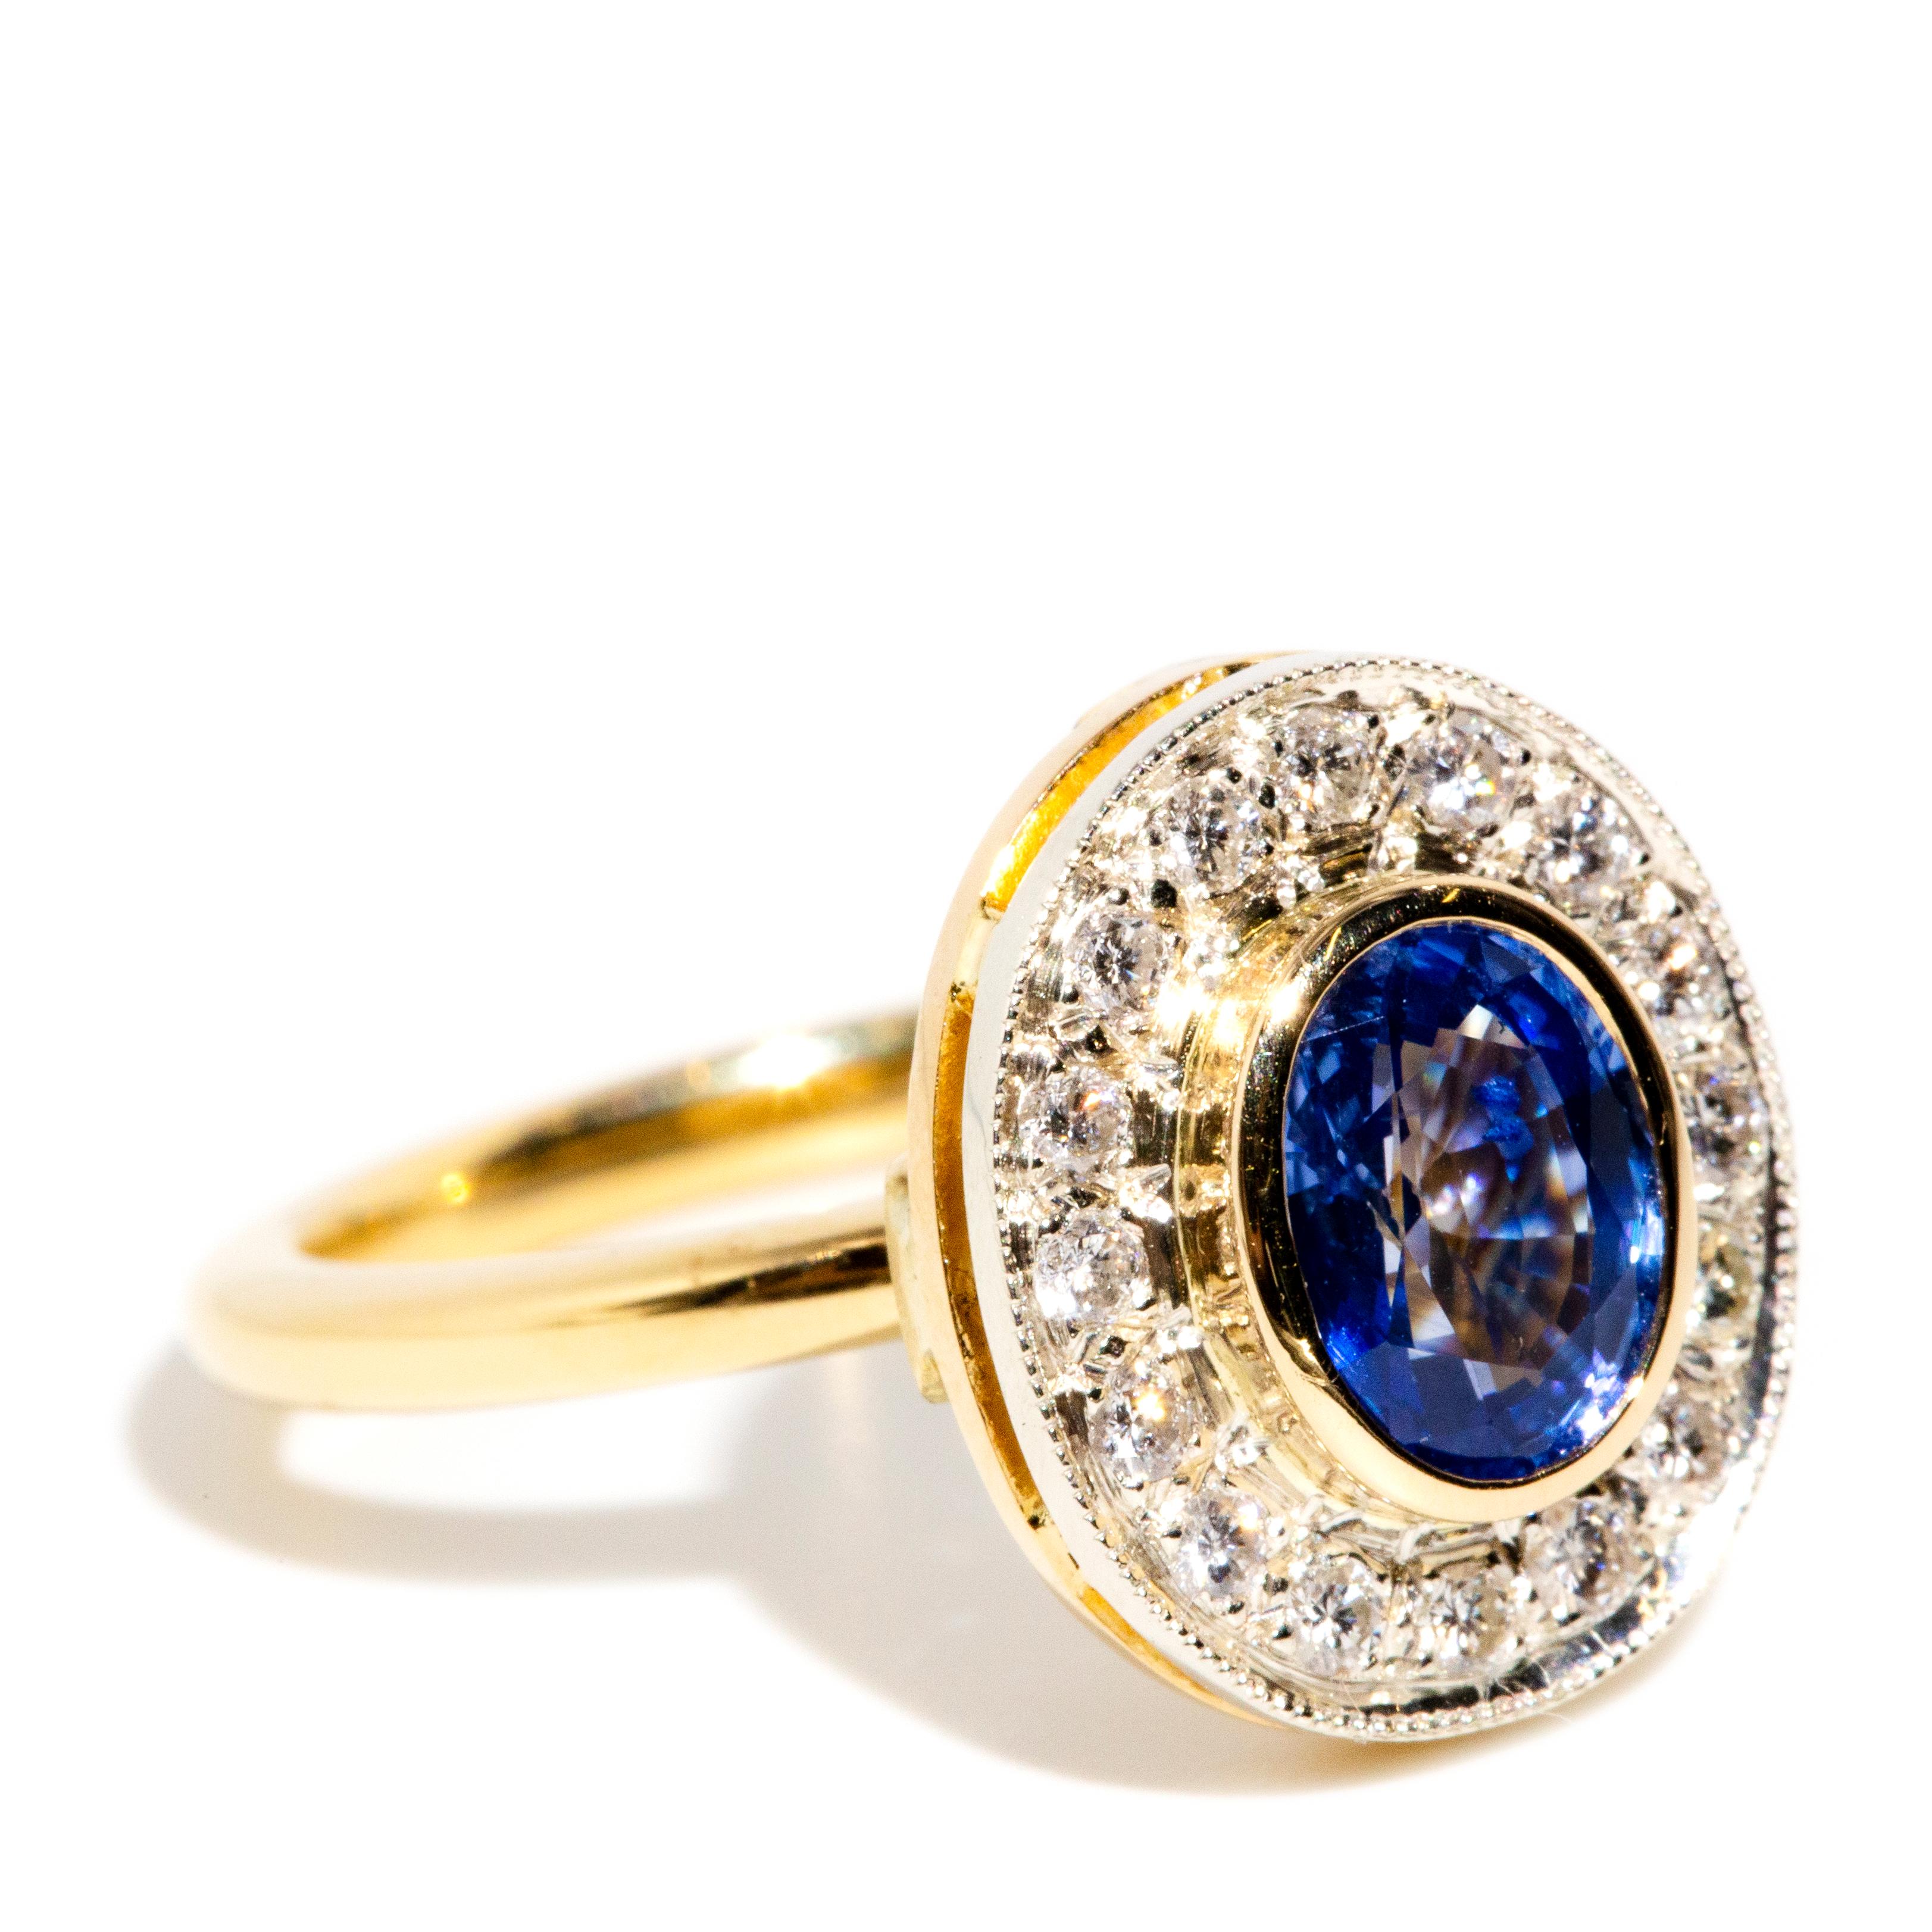 Modern Reinvented Vintage Circa 1980s Sapphire & Diamond Halo Ring 18 Carat Yellow Gold For Sale